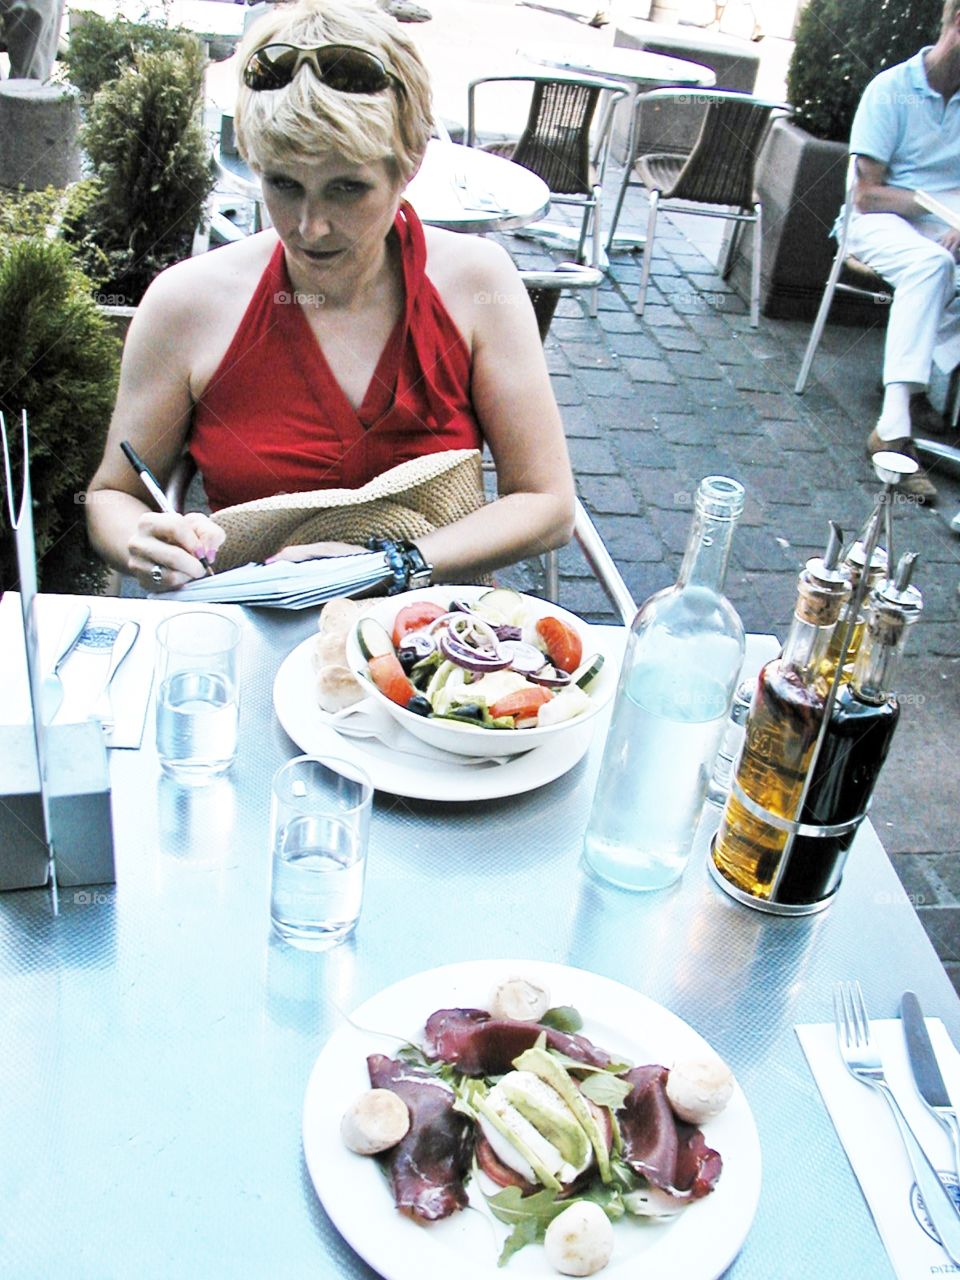 Outdoor French cafe. Taking travel notes during a salad luncheon at an ourdoor cafe in Tolouse, France